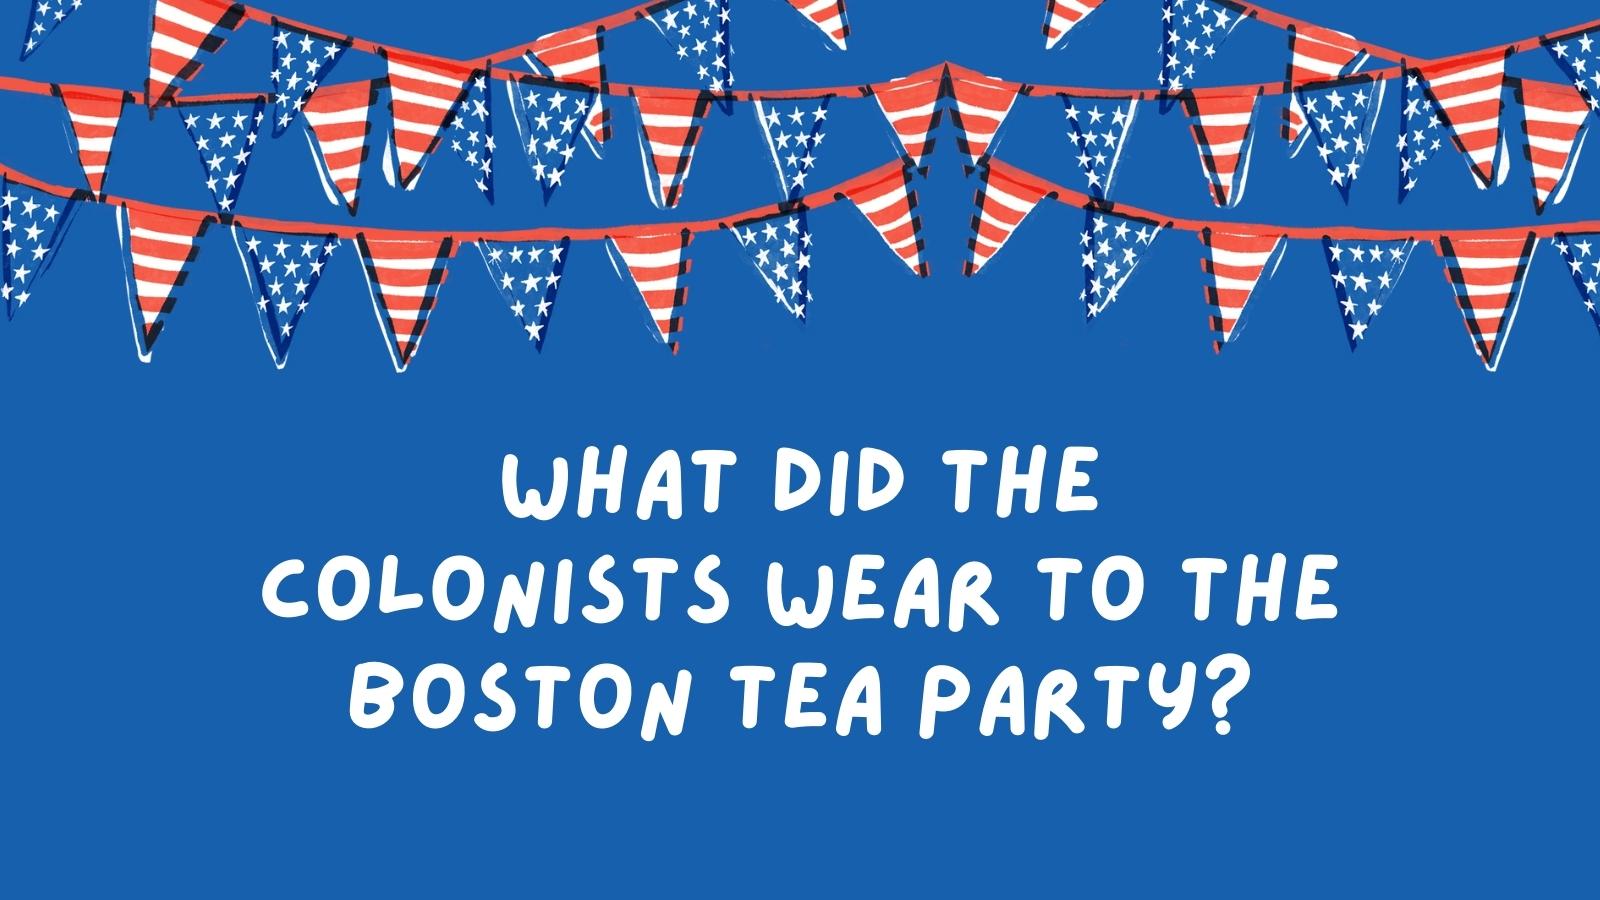 What did the colonists wear to the Boston Tea Party?